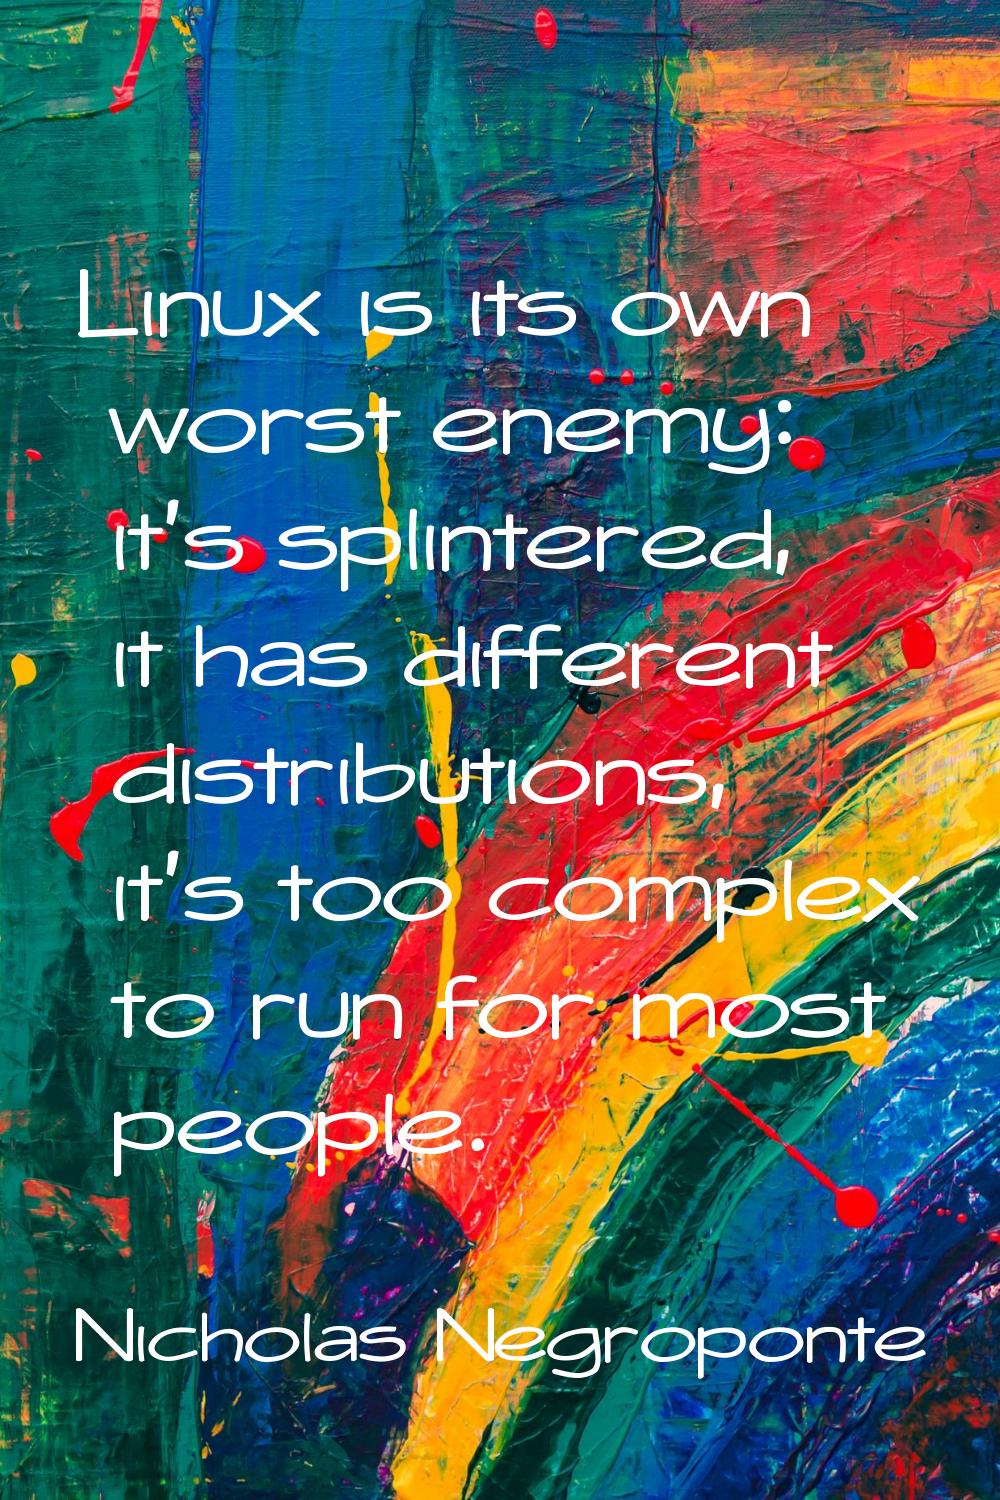 Linux is its own worst enemy: it's splintered, it has different distributions, it's too complex to 